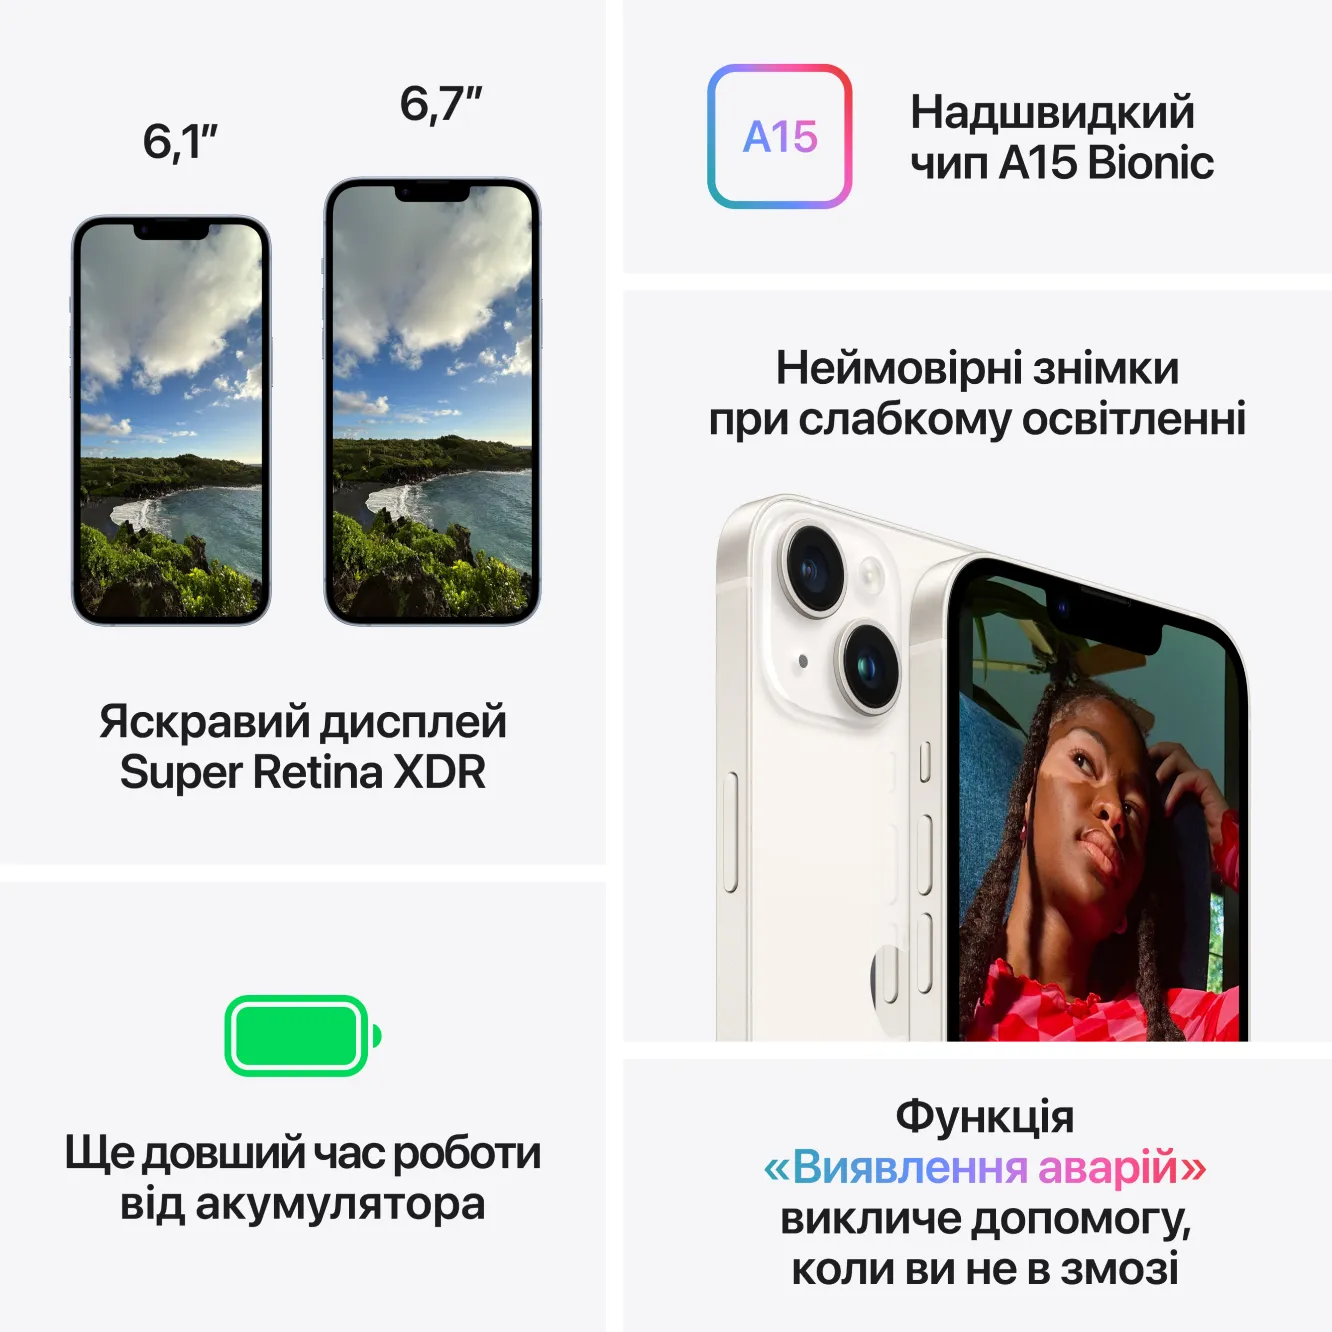 iphone14 features image